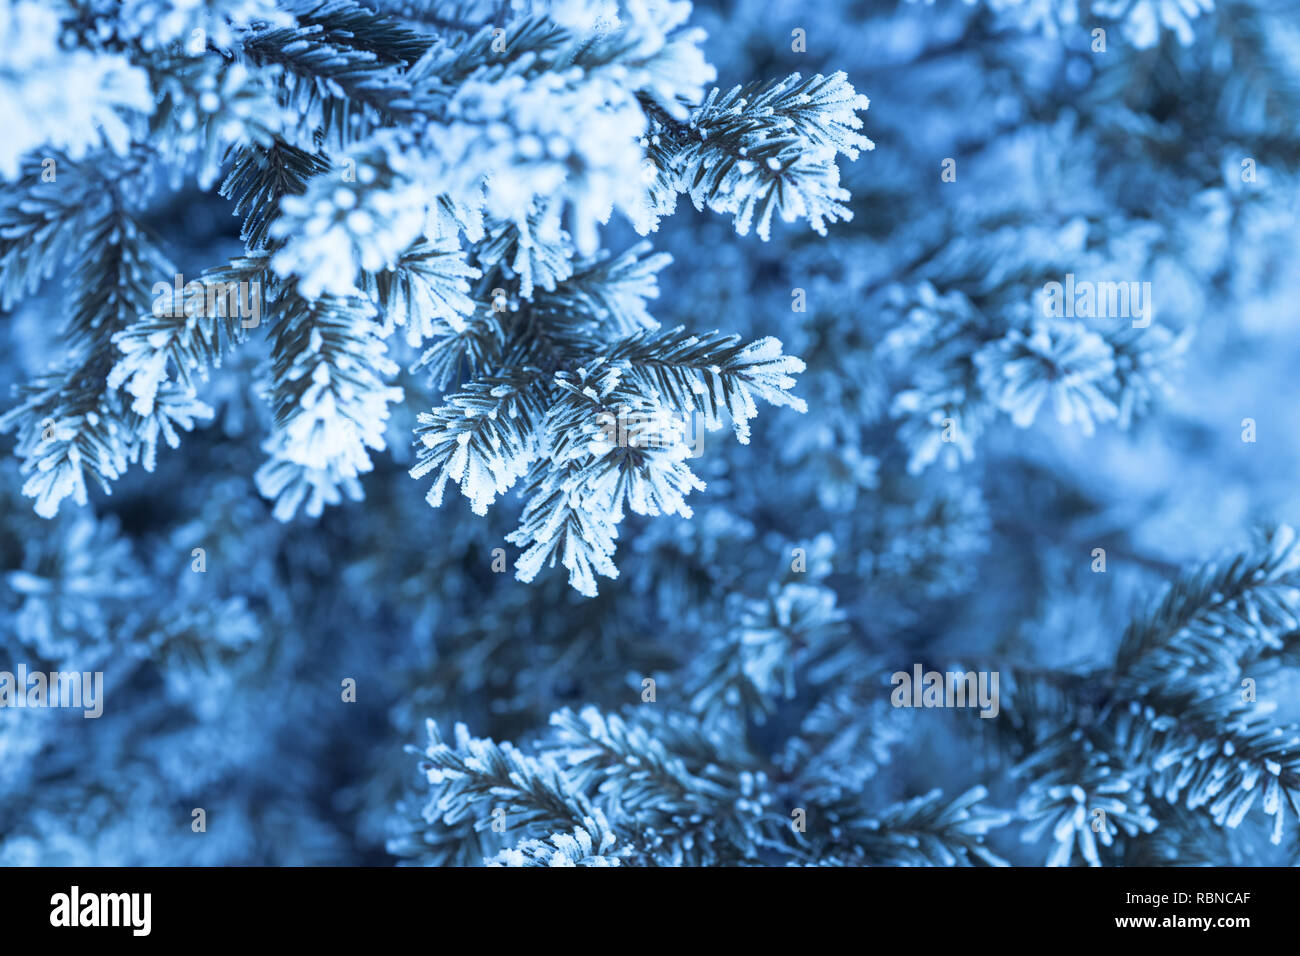 Blue Frozen branch of fir tree. Winter nature snowy outdoor background. Snow time Stock Photo Alamy